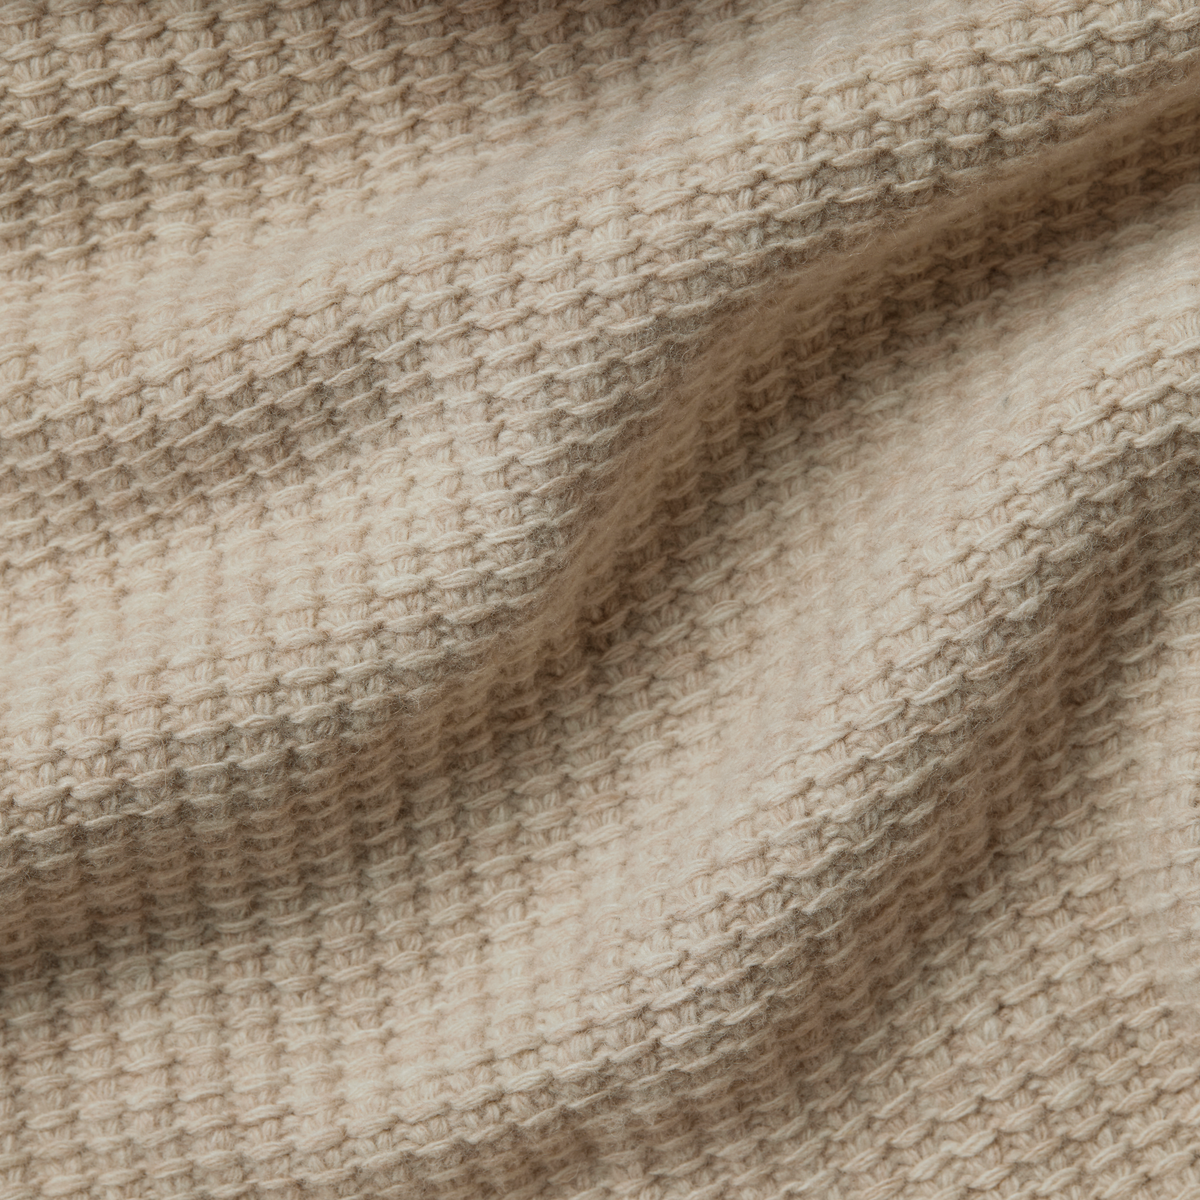 Zoomed Fabric of Sferra Pettra Throw Blanket in Beige Color